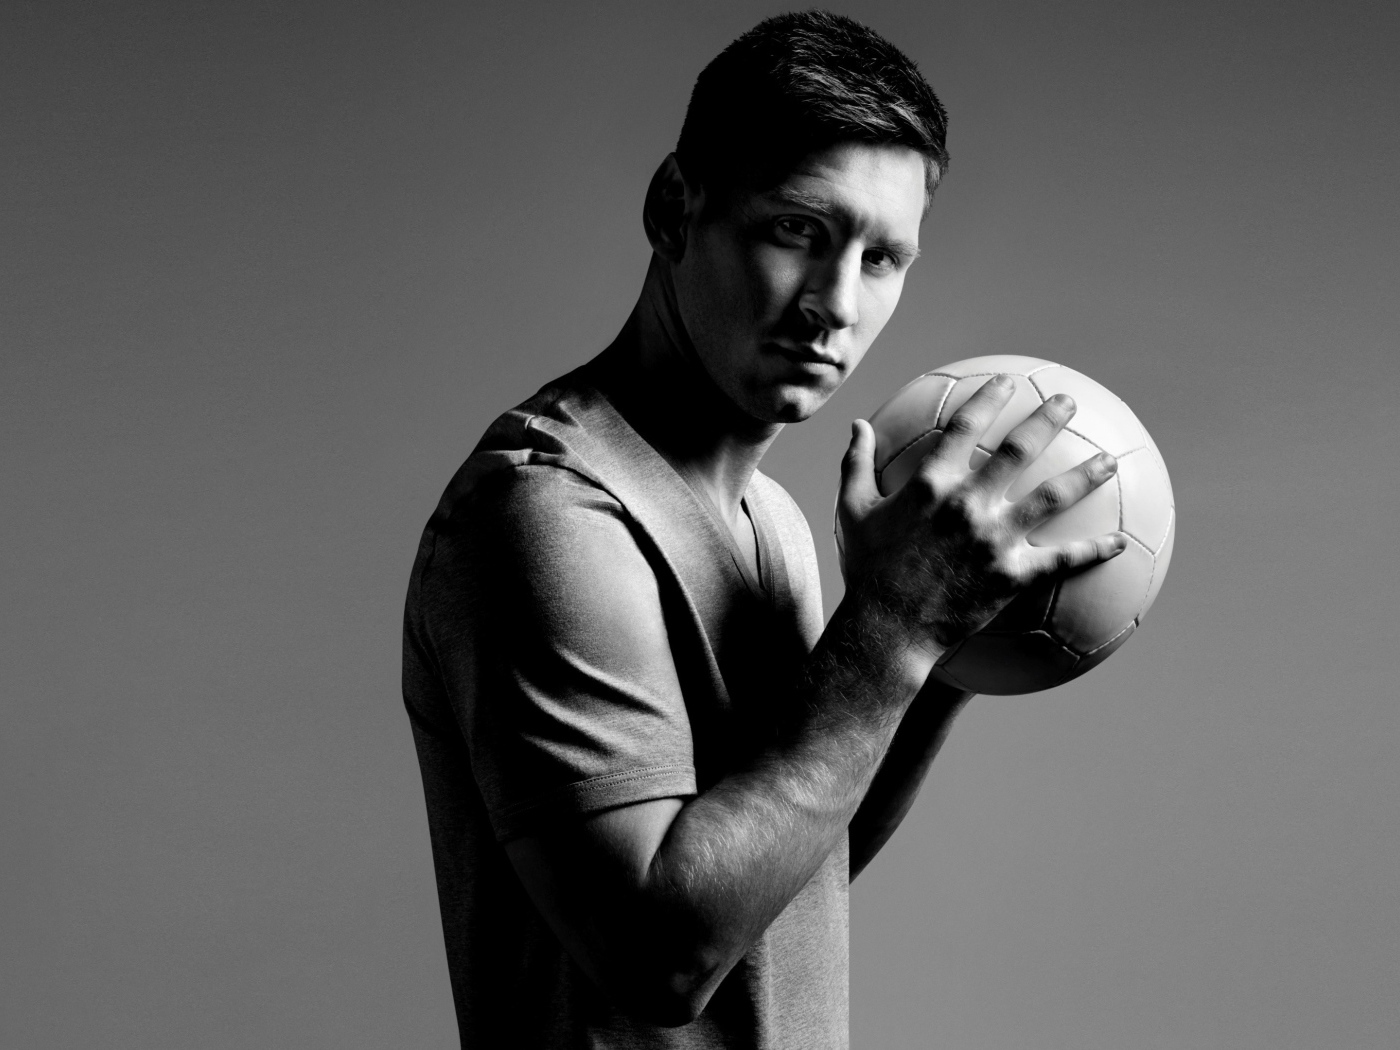 Football player Lionel Messi with the ball in his hands black and white photo